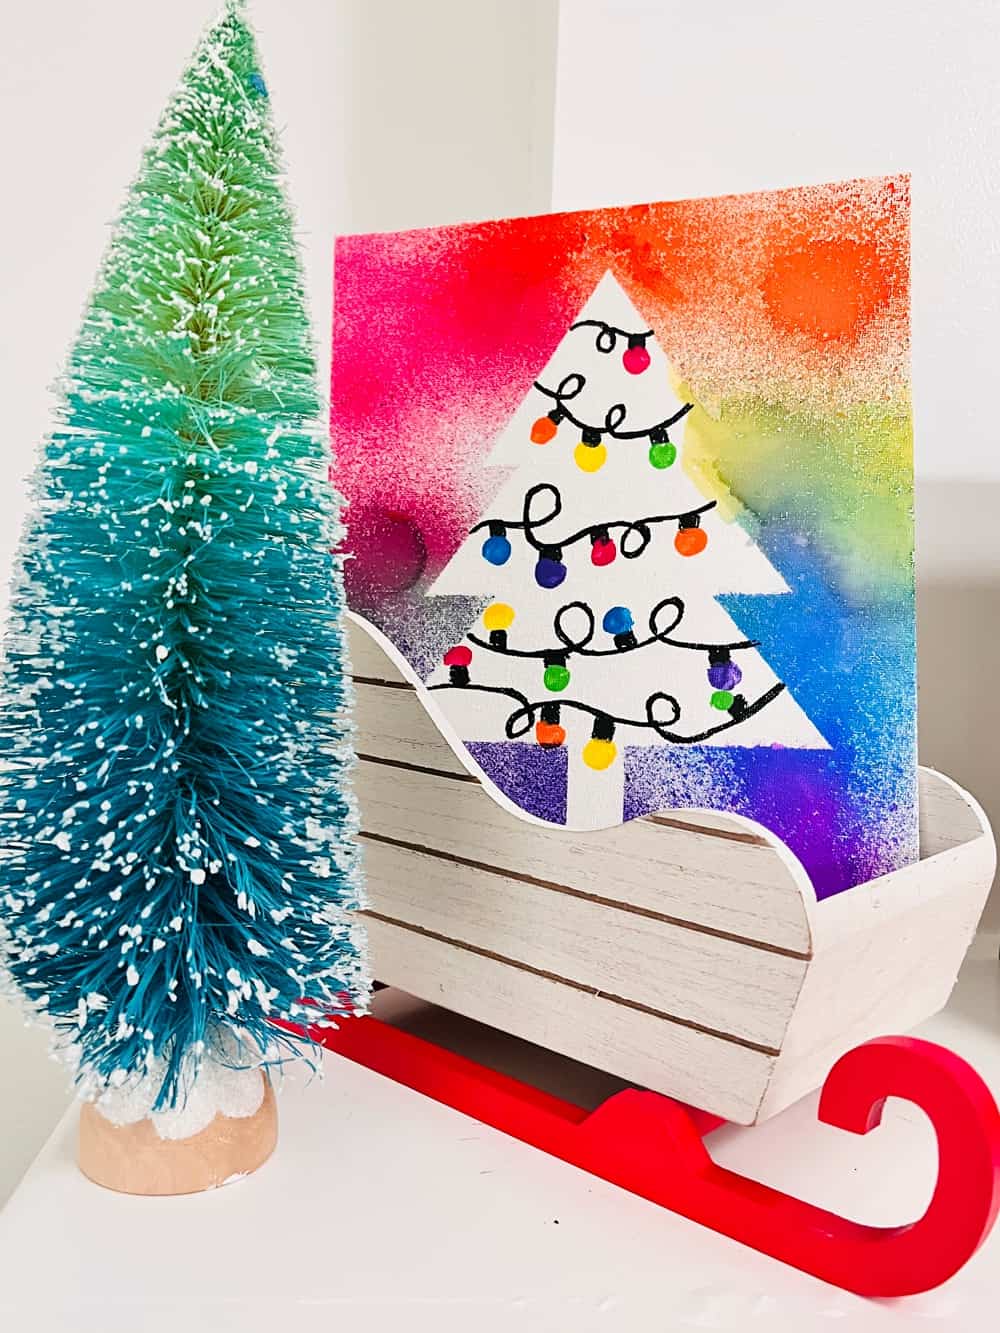 Spray Paint Christmas Tree Art with watercolors 